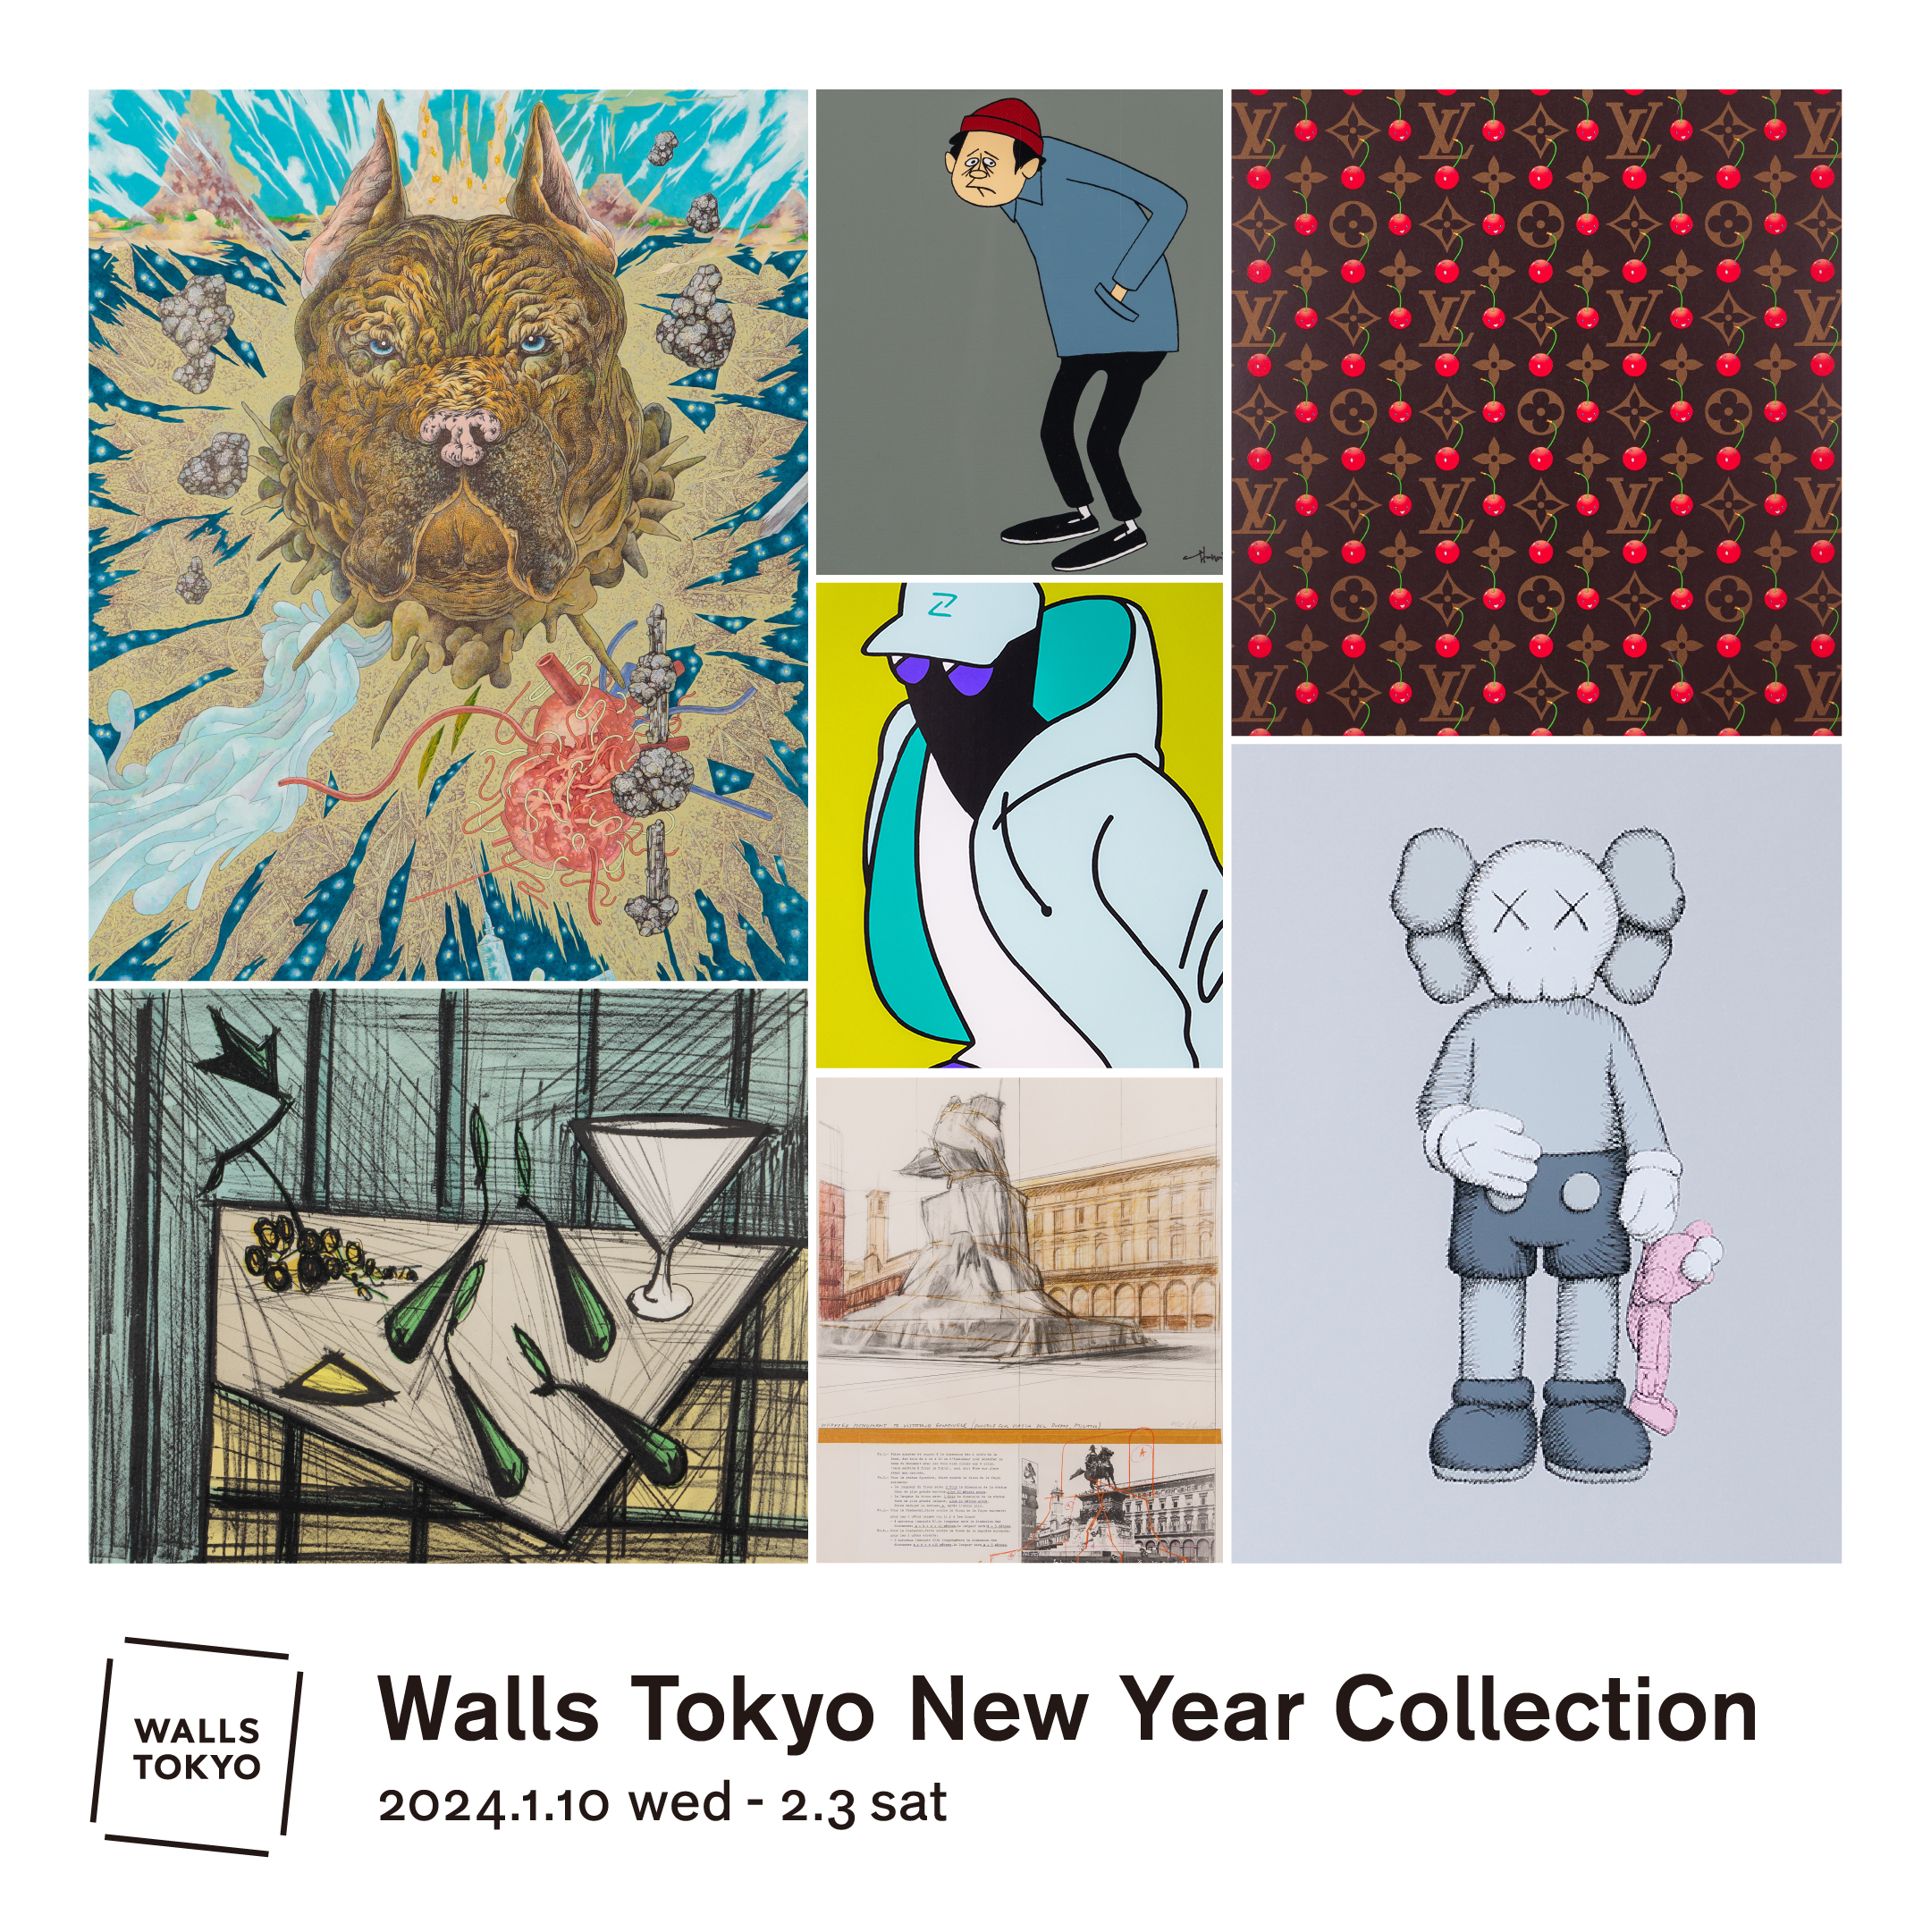 Walls Tokyo New Year Collection